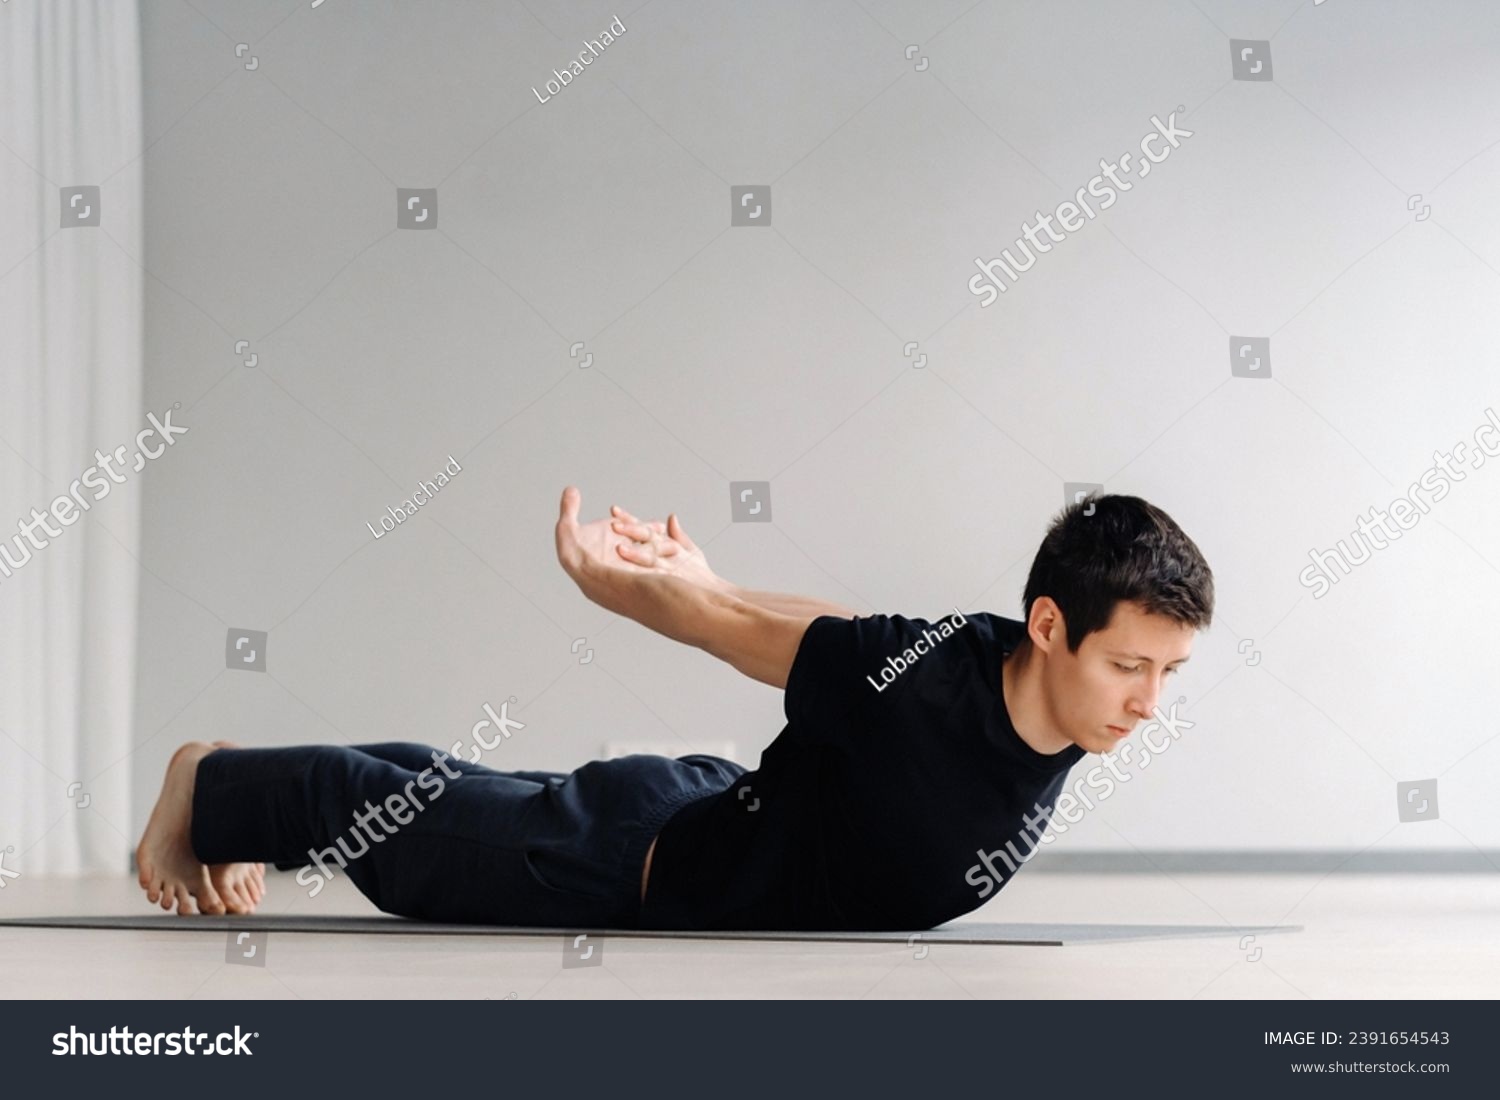 A man in a black T-shirt trains lying down doing stretches in the gym. #2391654543